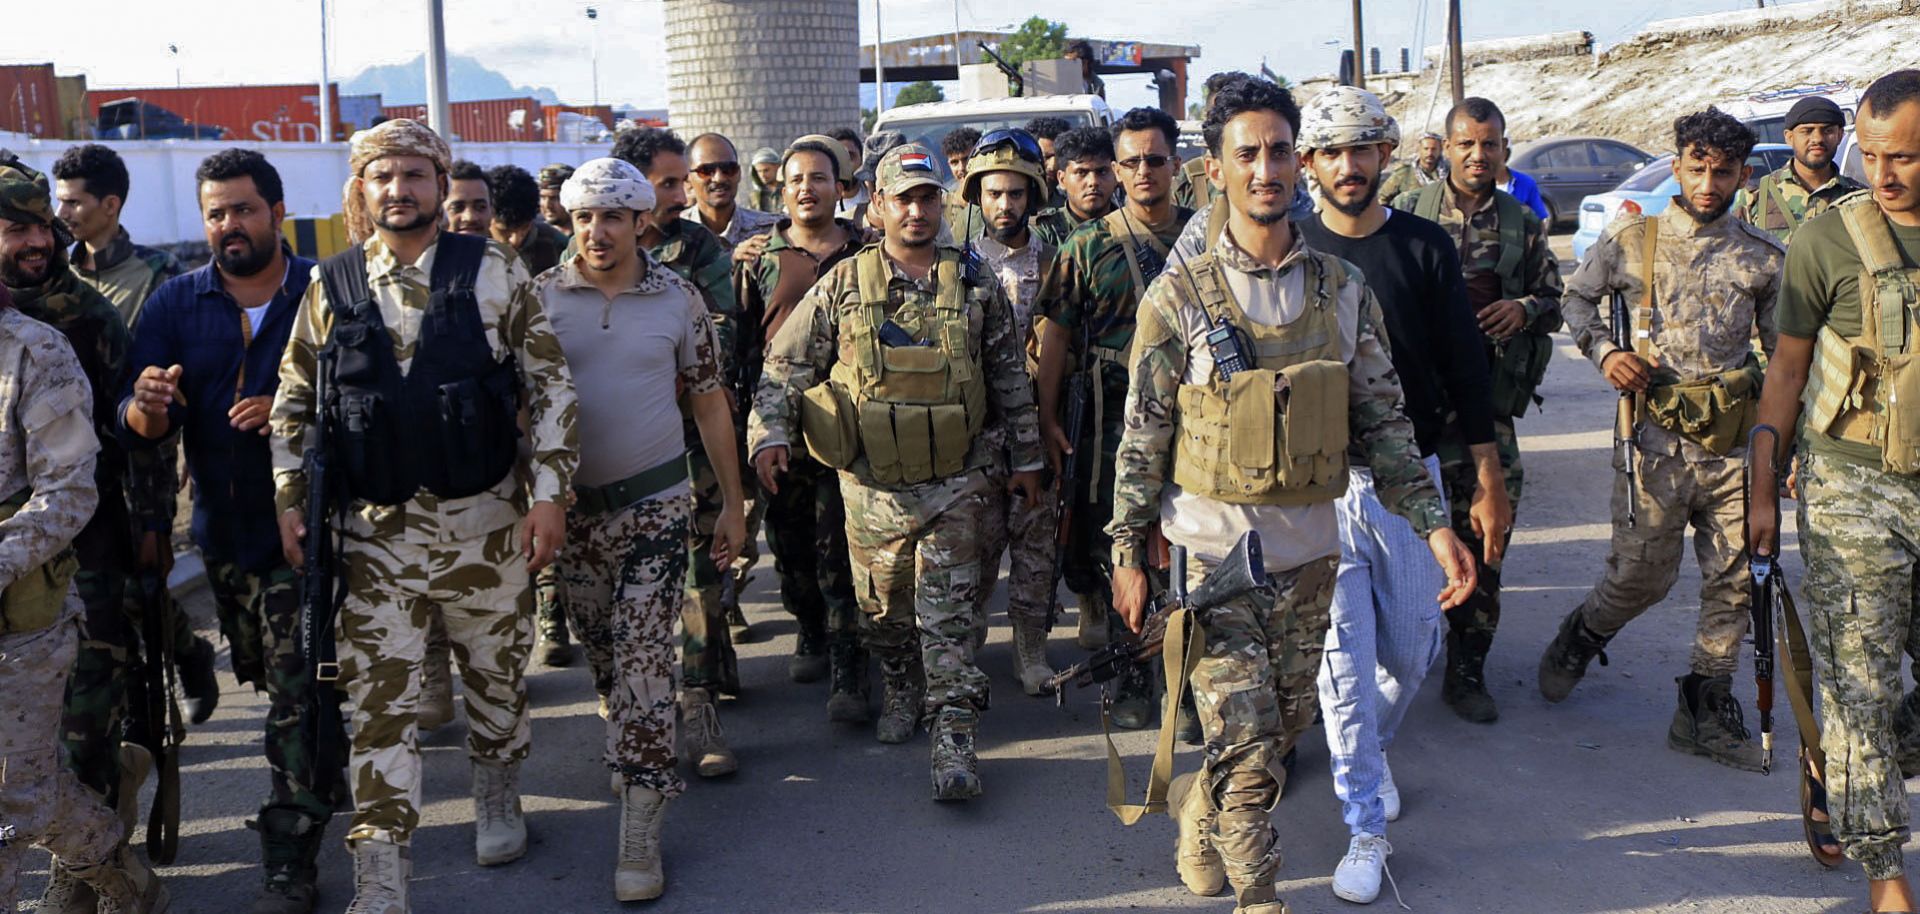 Fighters with Yemen's separatist Southern Transitional Council (STC) deploy in the city of Aden on April 26, 2020, after declaring self-rule of the country's south.